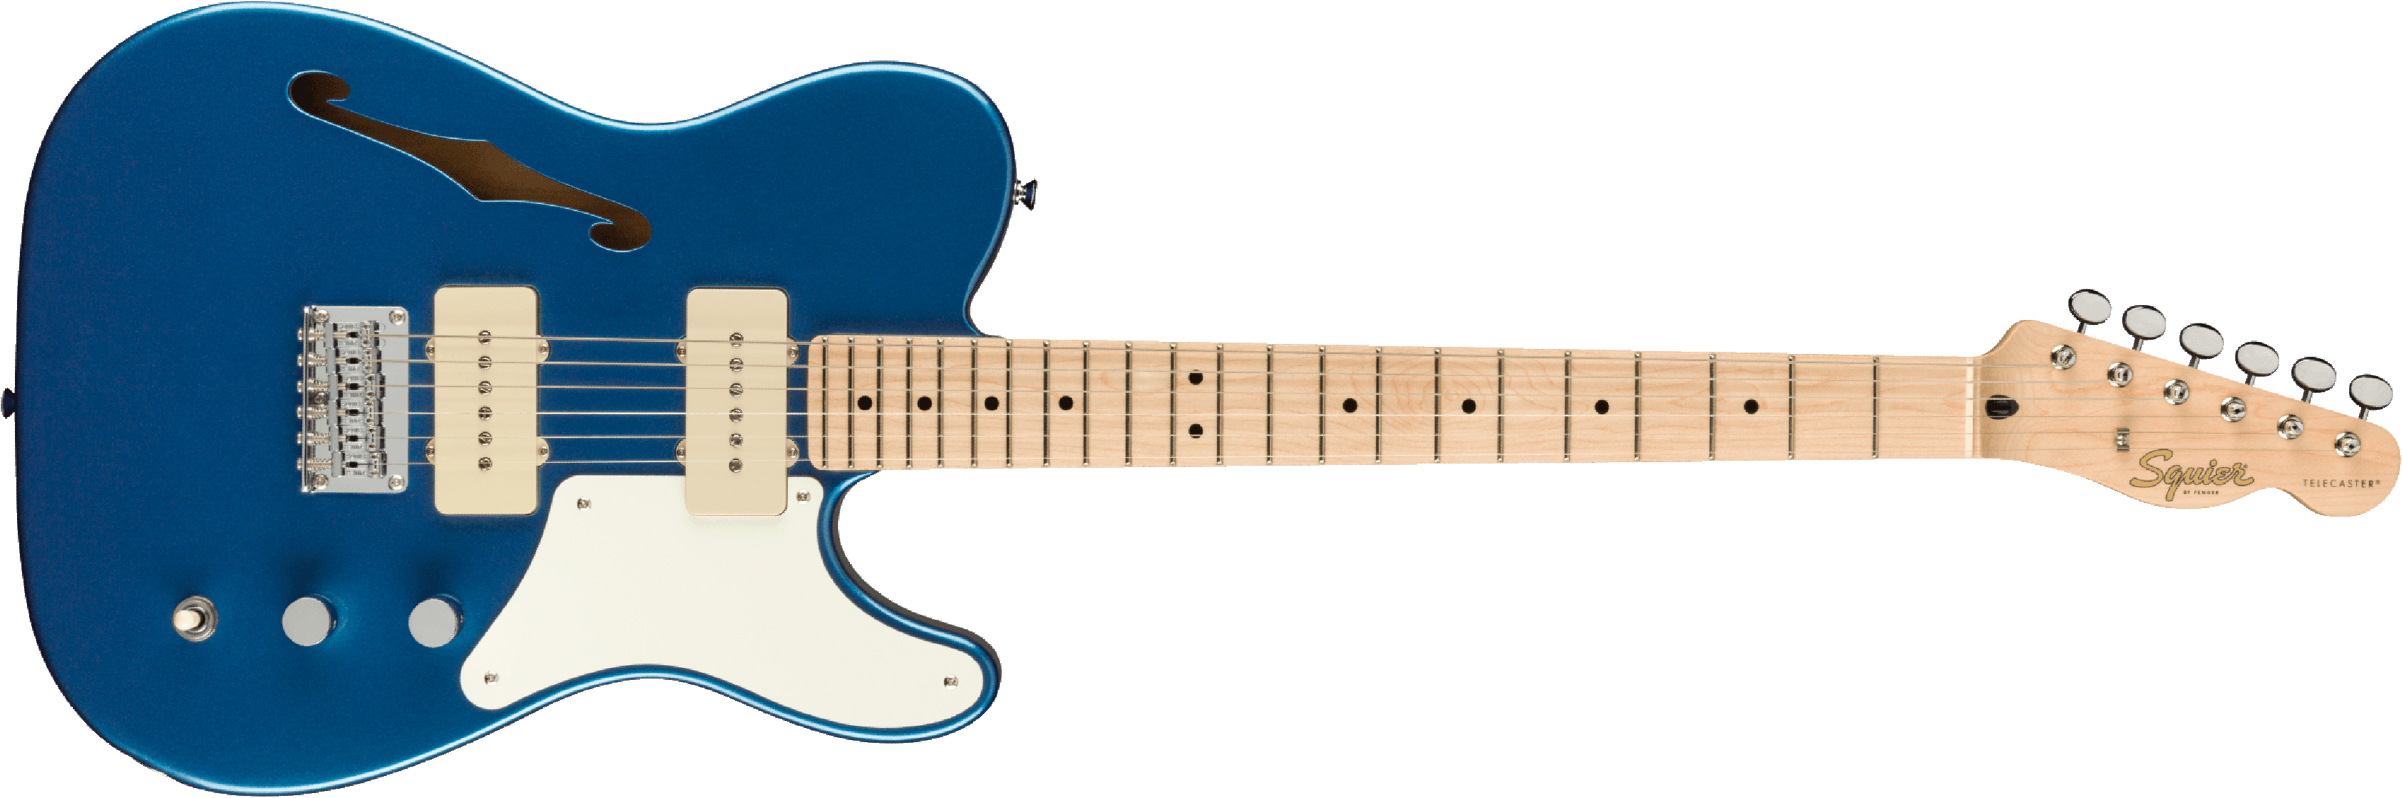 Squier Tele Cabronita Thinline Paranormal Ss Ht Mn - Lake Placid Blue - Tel shape electric guitar - Main picture